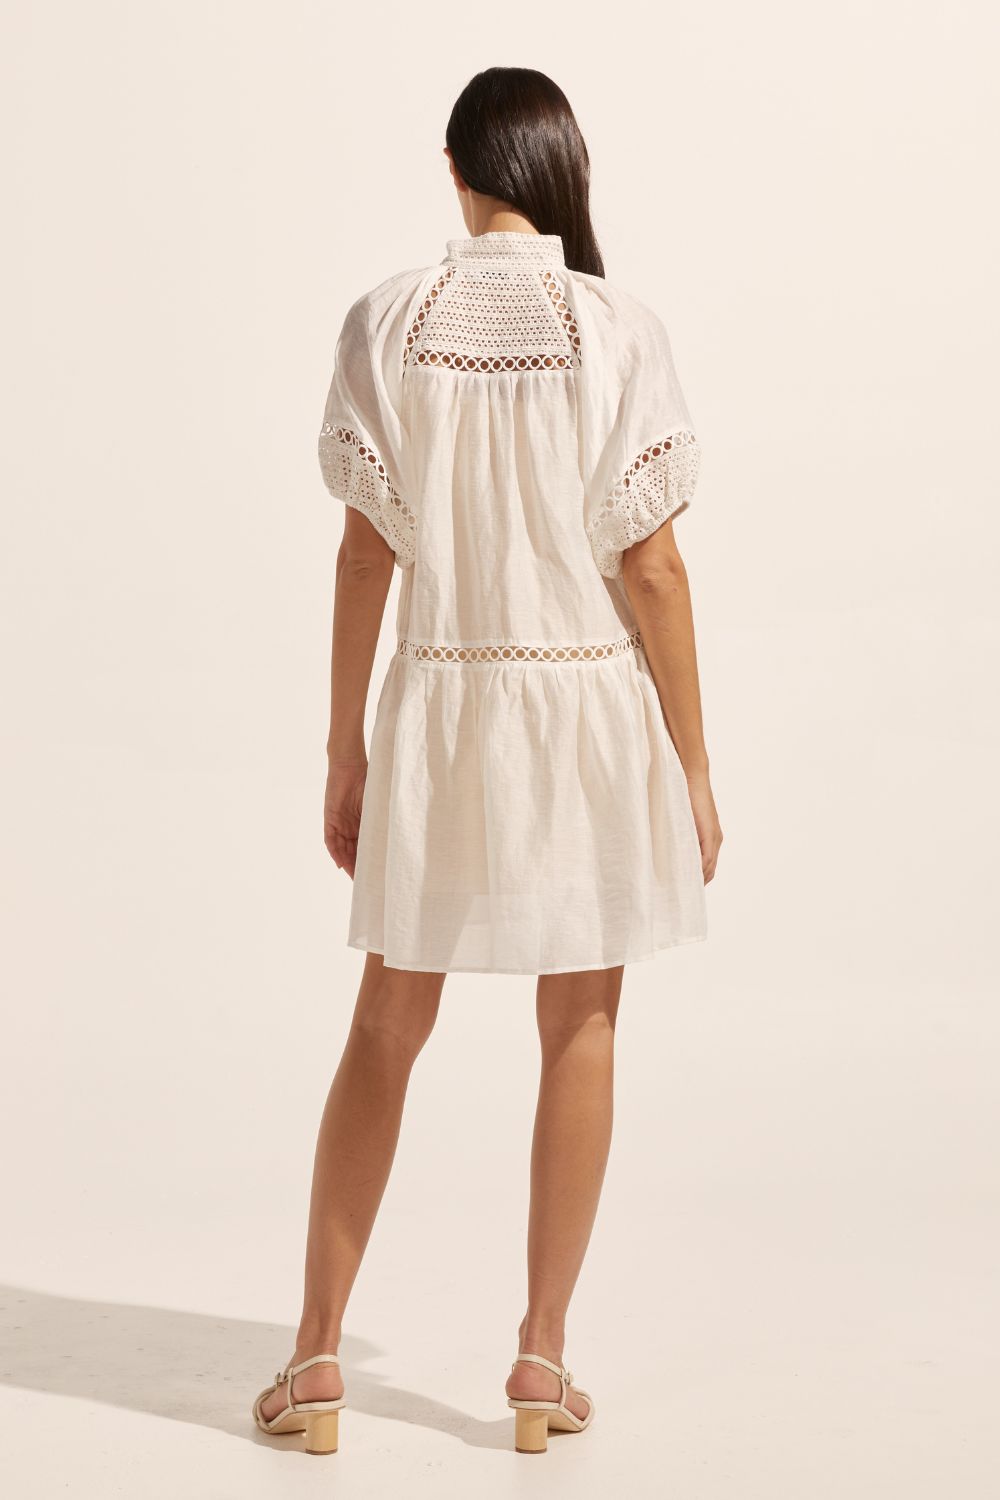 white, high neck, covered buttons, circular lace detailing, drop waist, mid-length sleeve, mini dress, back image